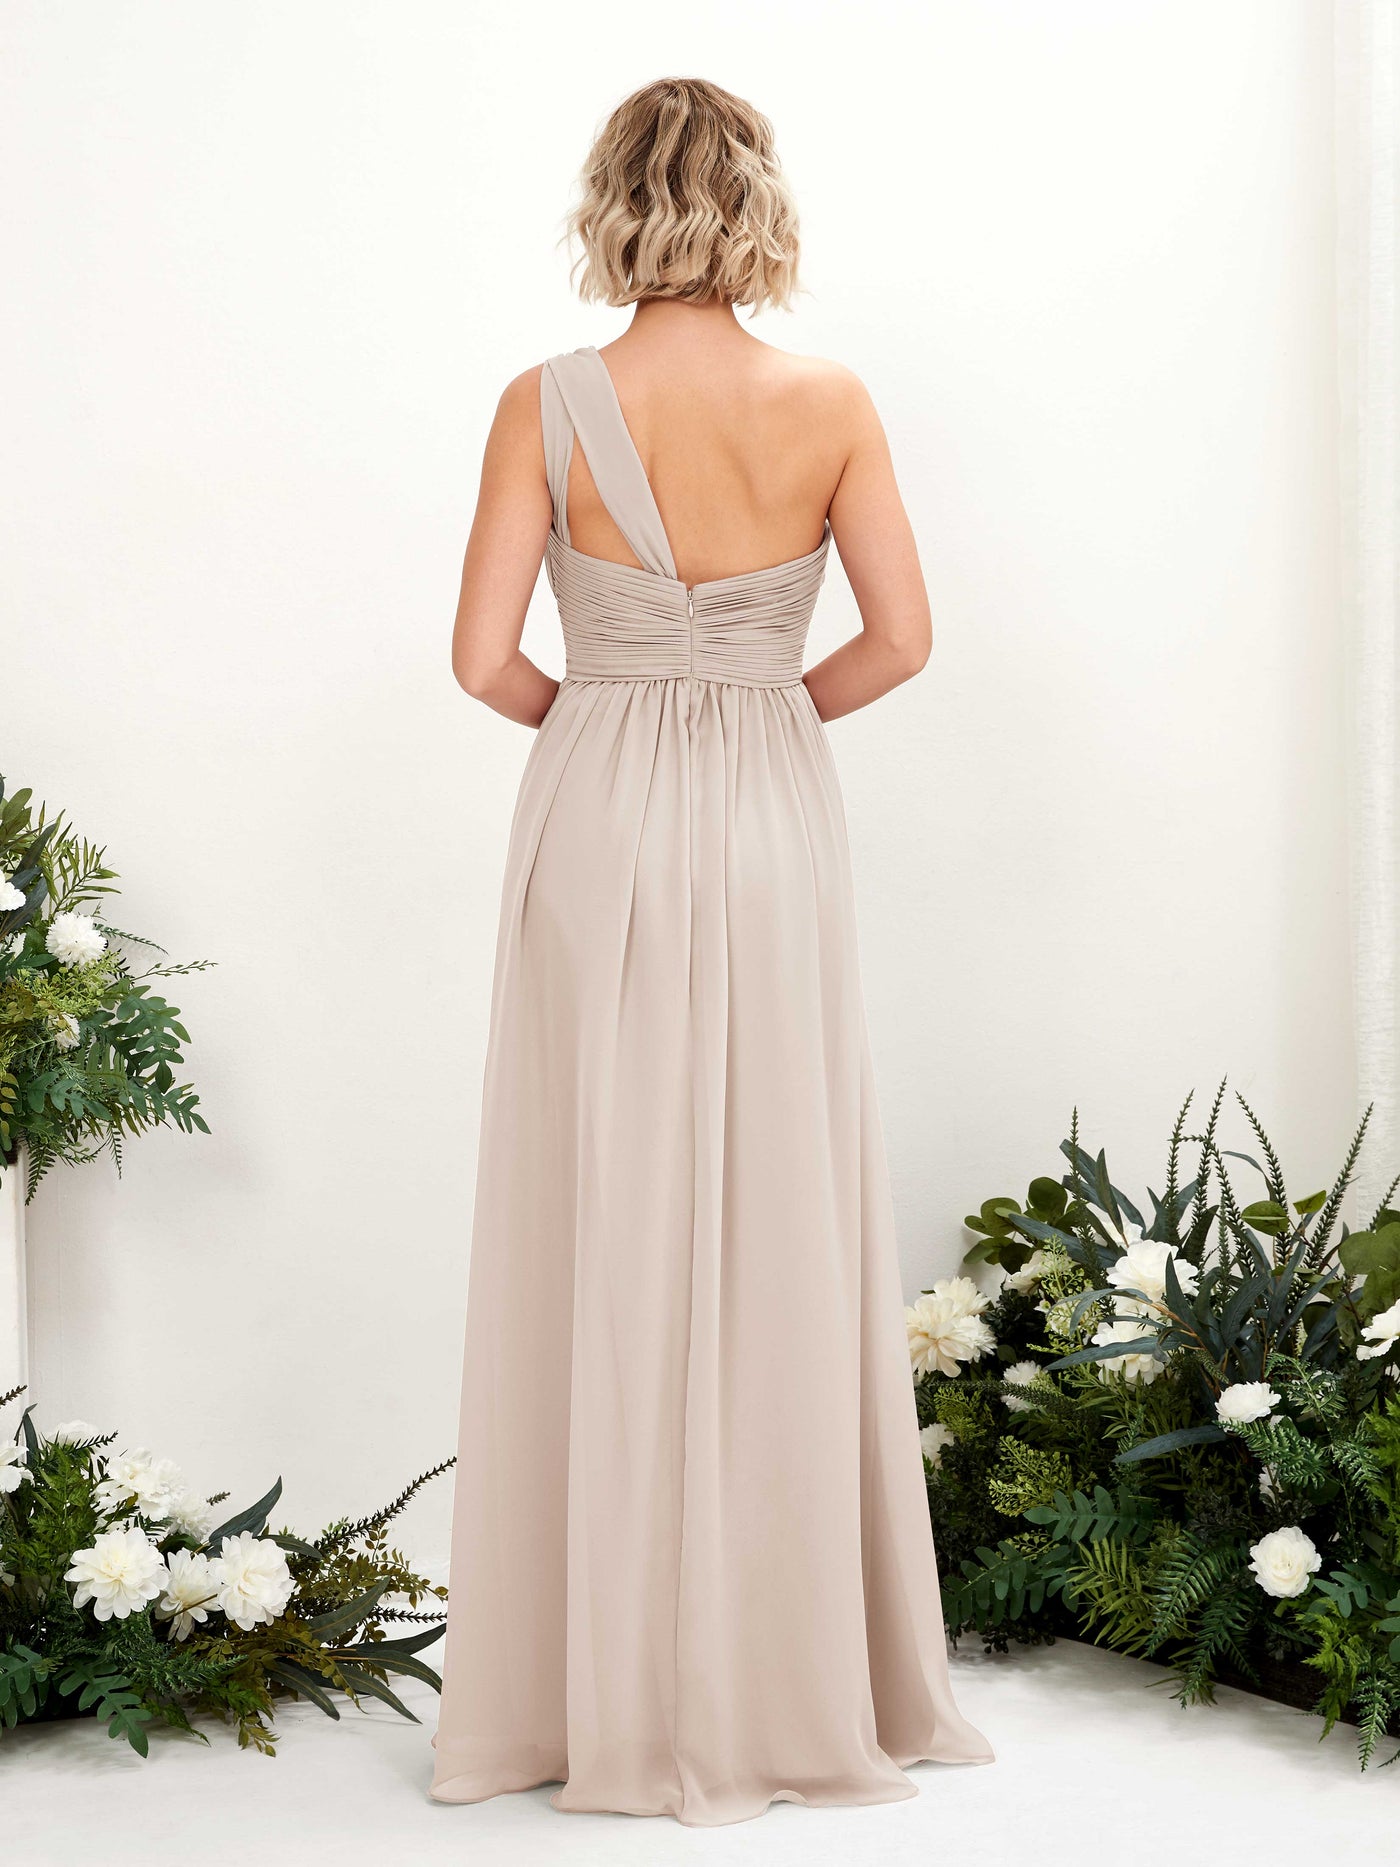 Champagne Bridesmaid Dresses Bridesmaid Dress Ball Gown Chiffon One Shoulder Full Length Sleeveless Wedding Party Dress (81225016)#color_champagne